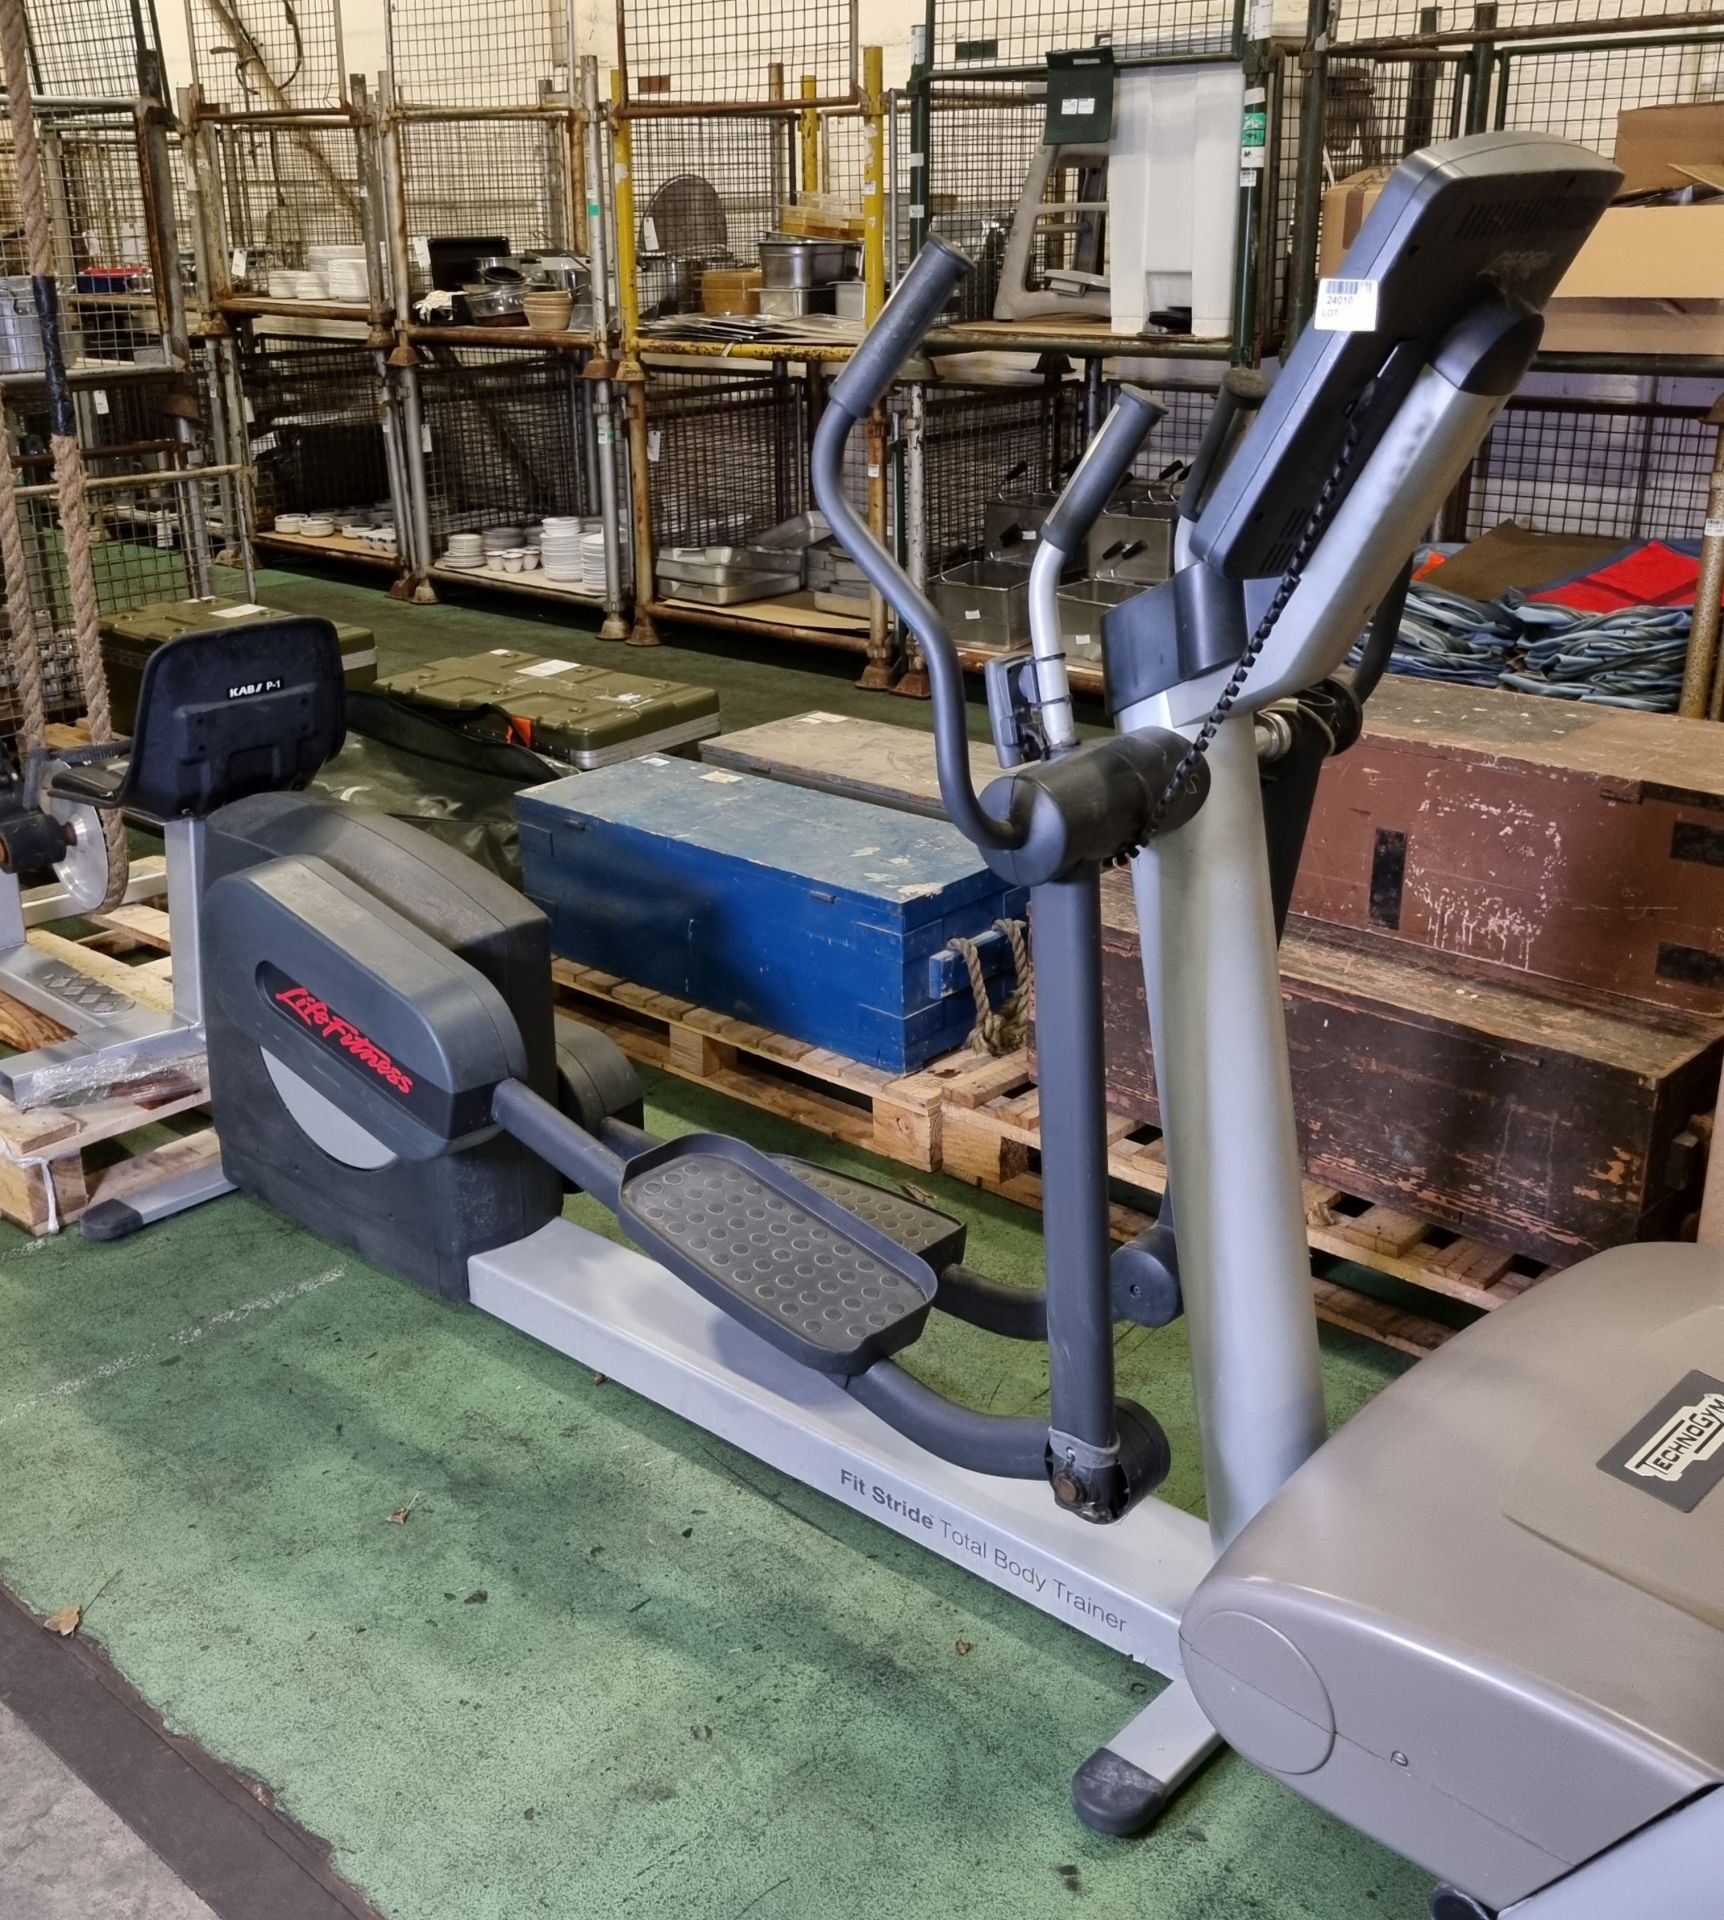 Life Fitness Fit Stride elliptical cross trainer - L 2100 x W 800 x H 1600mm - DAMAGE AND RUSTING - Image 3 of 9